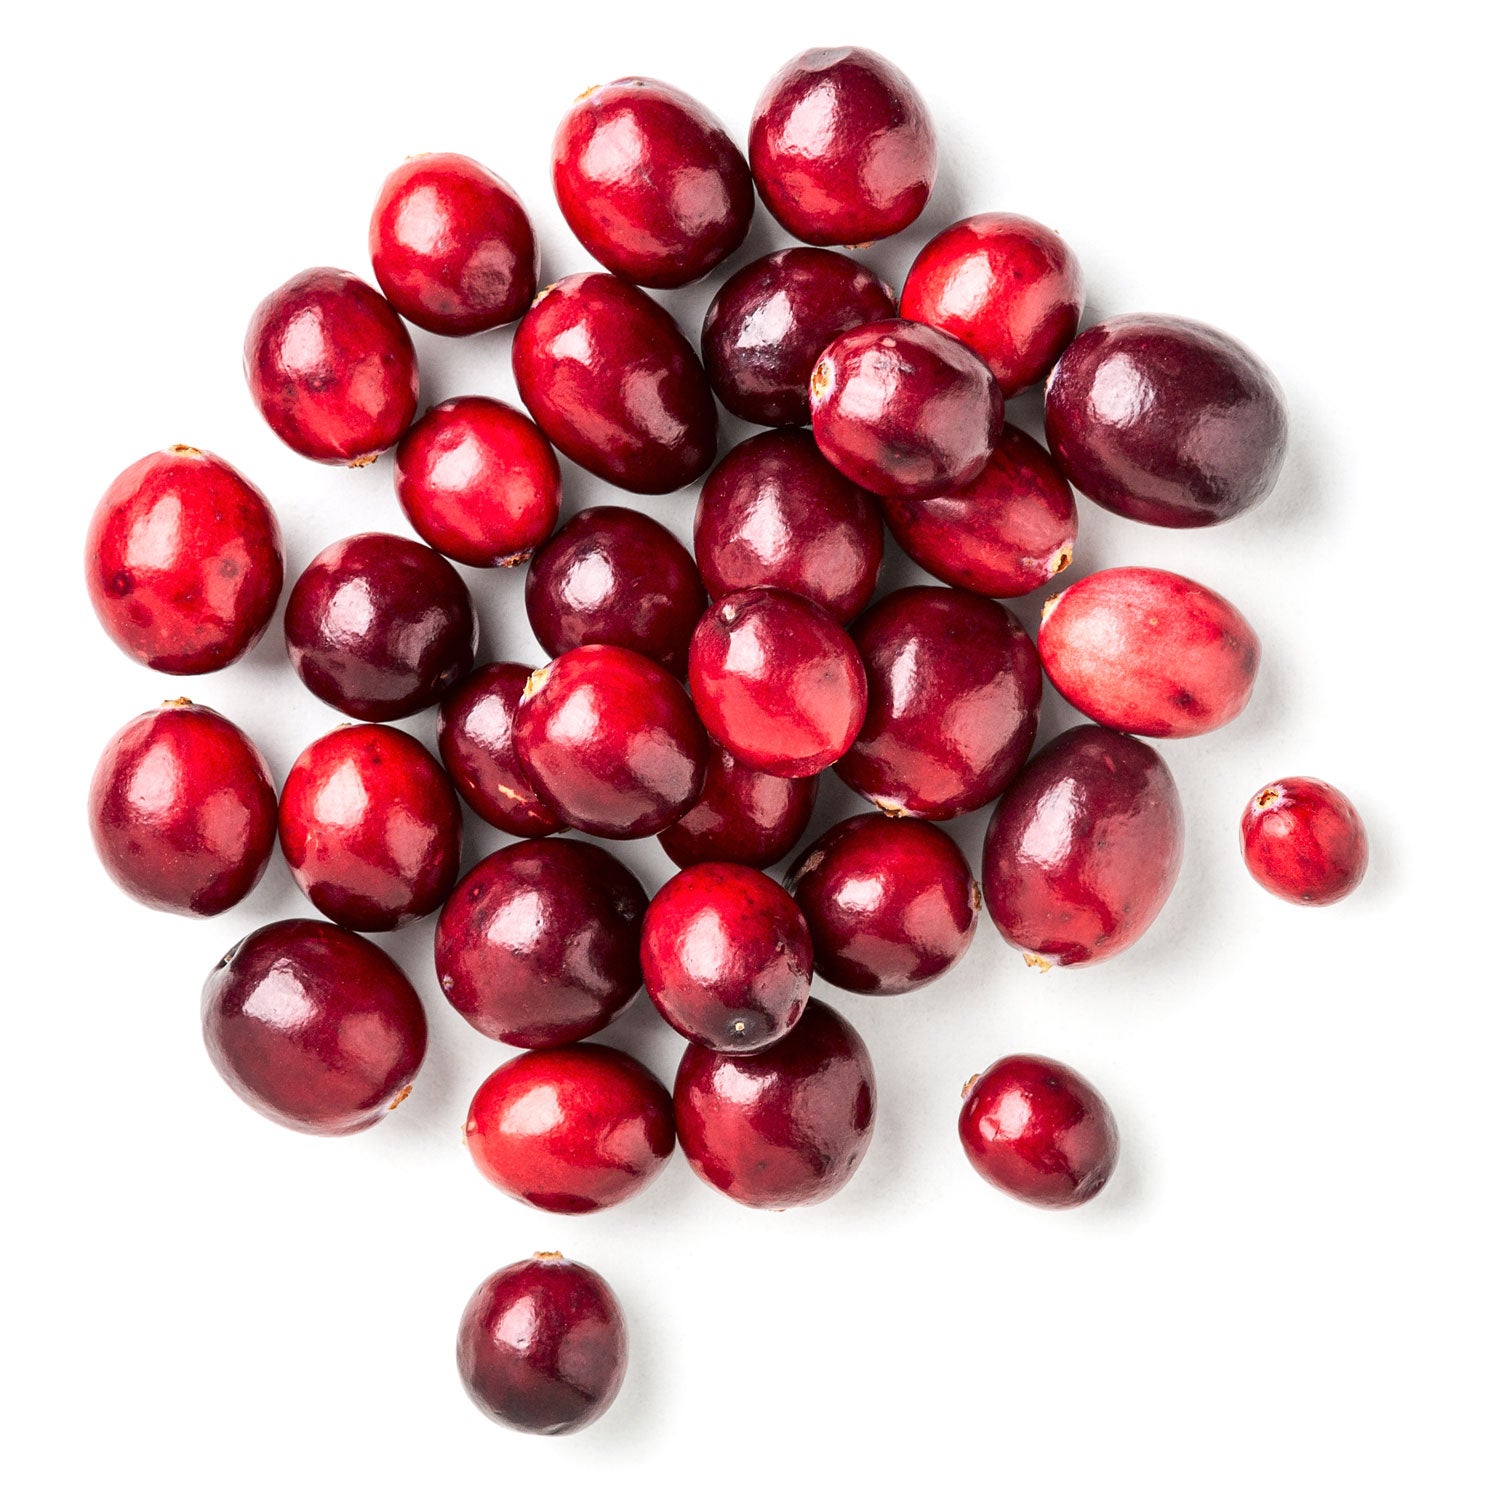 grab-the-gold-ingredents-for-website-cranberries.jpg__PID:0ecef657-bbff-441e-bb67-1a55c7ff7700